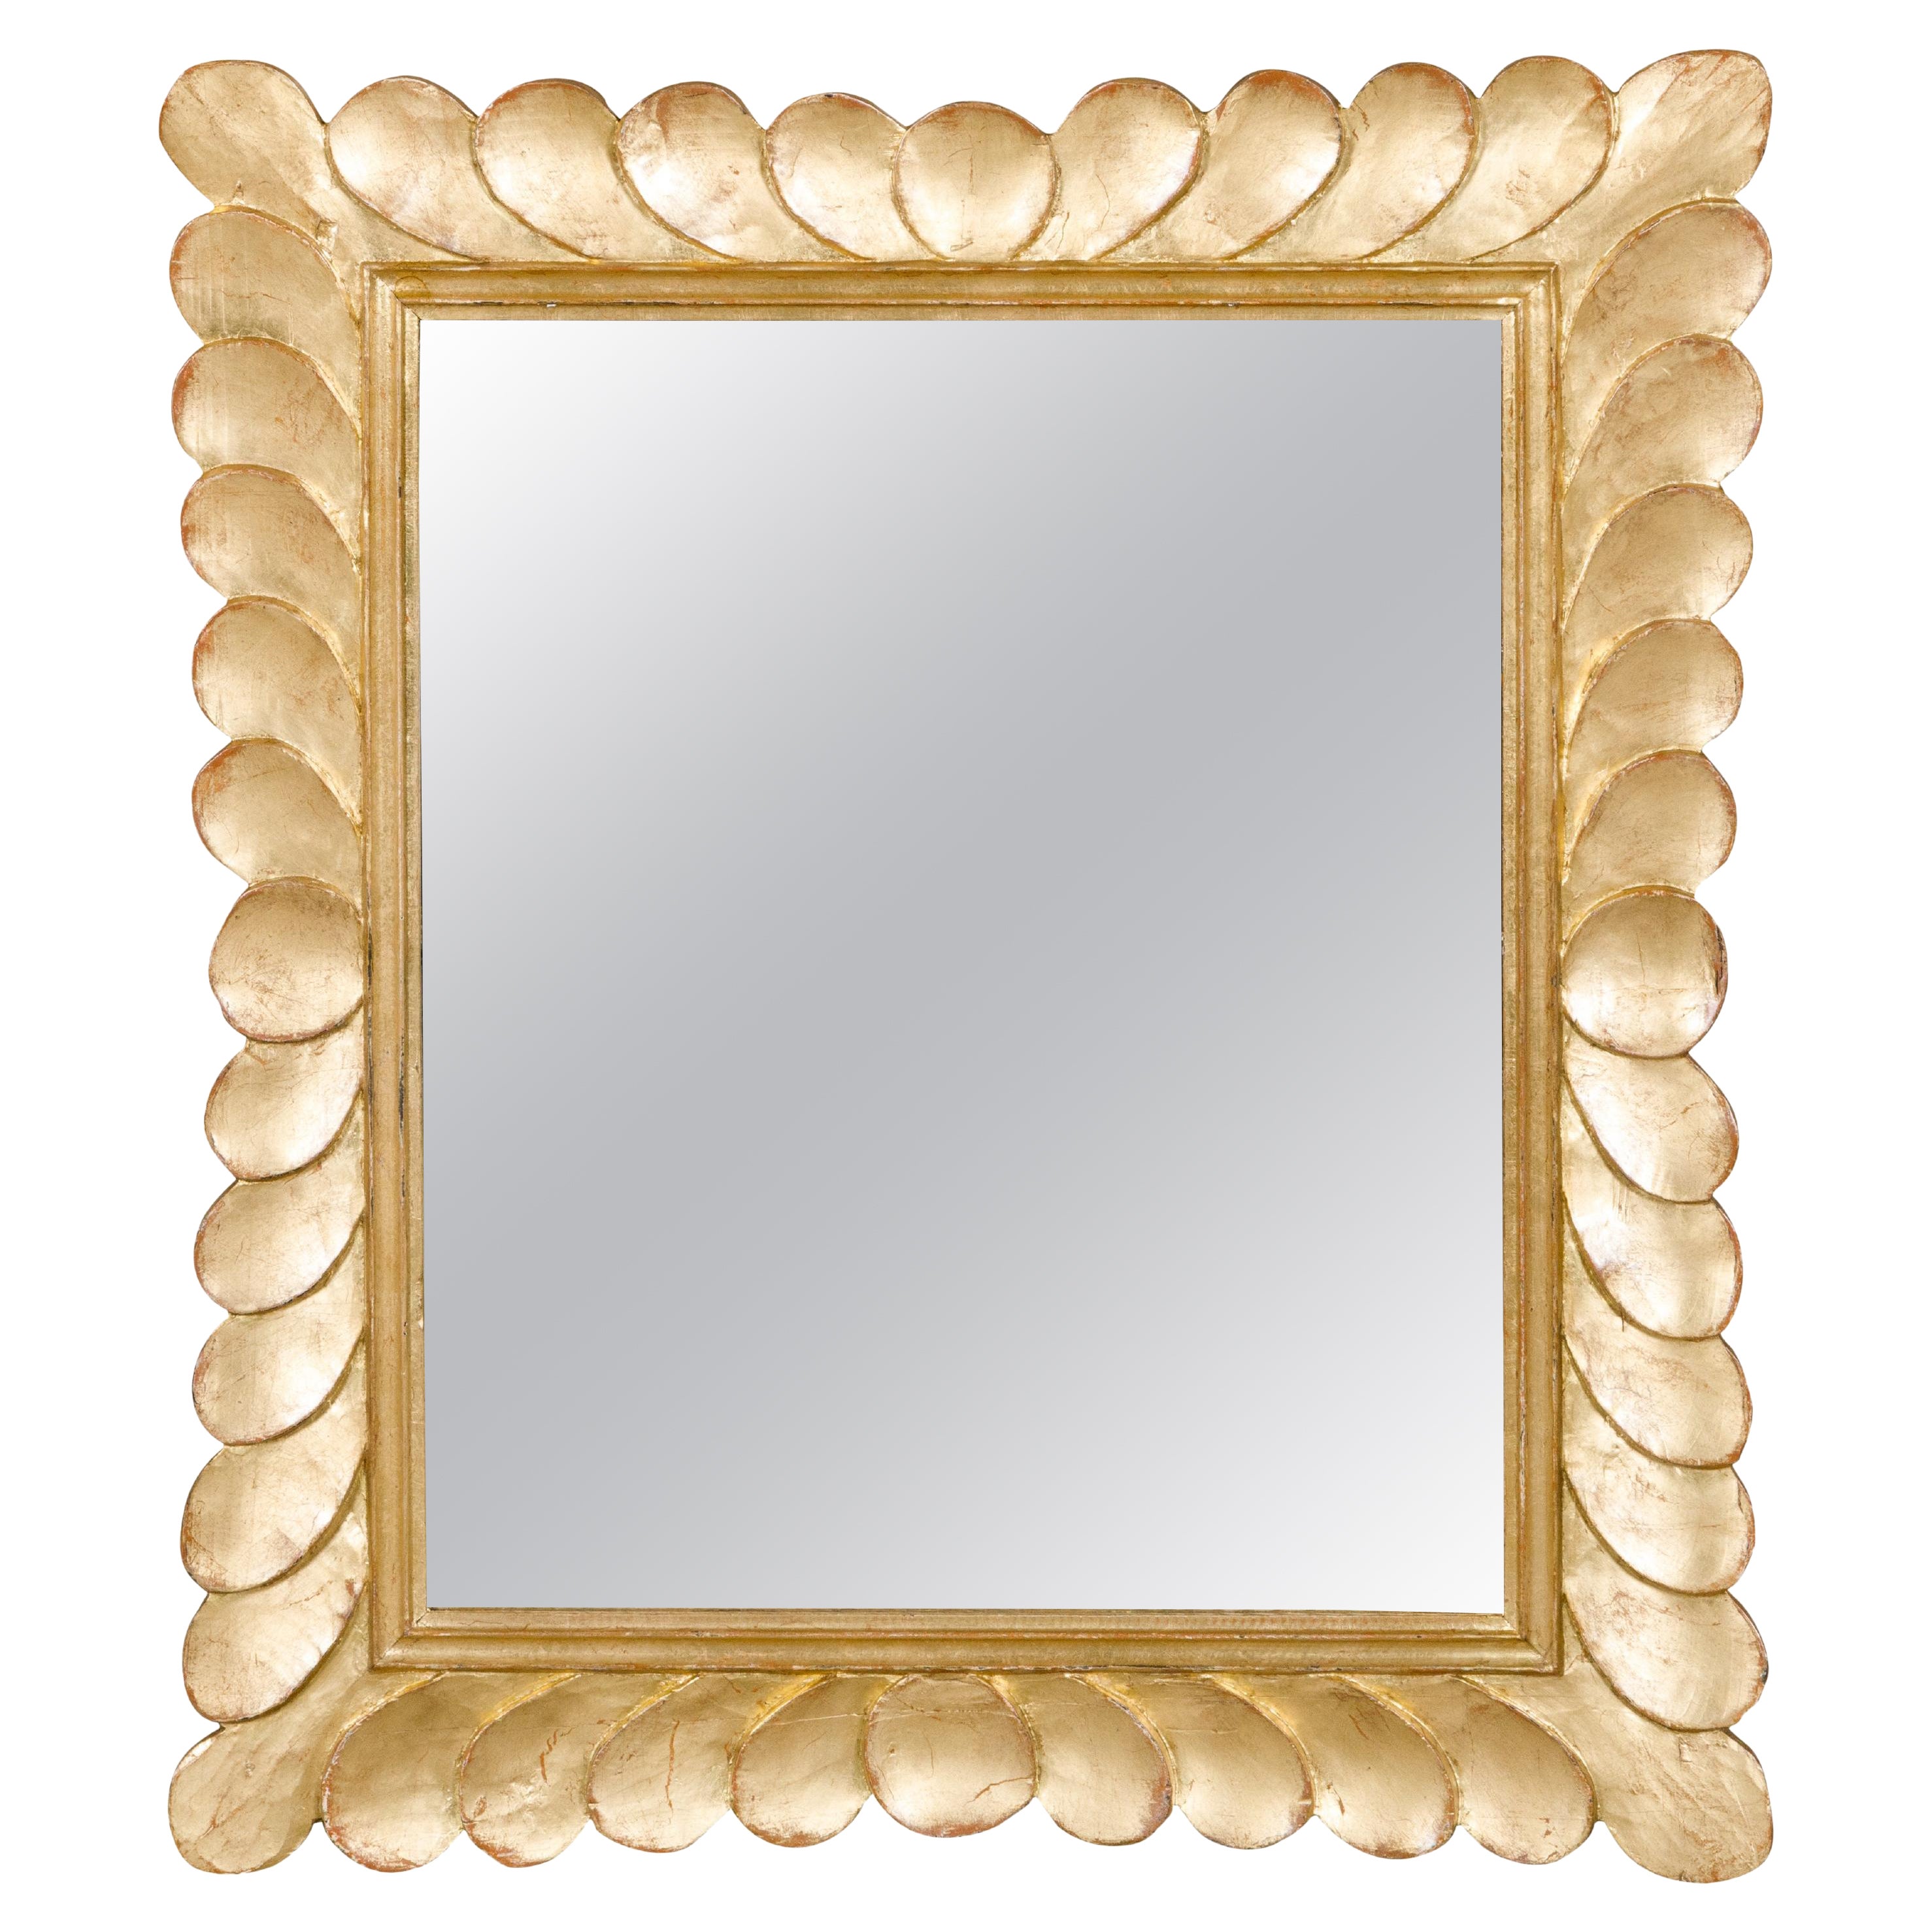 Giltwood Italian 1950s Carved Petal Themed Frame Midcentury Mirror